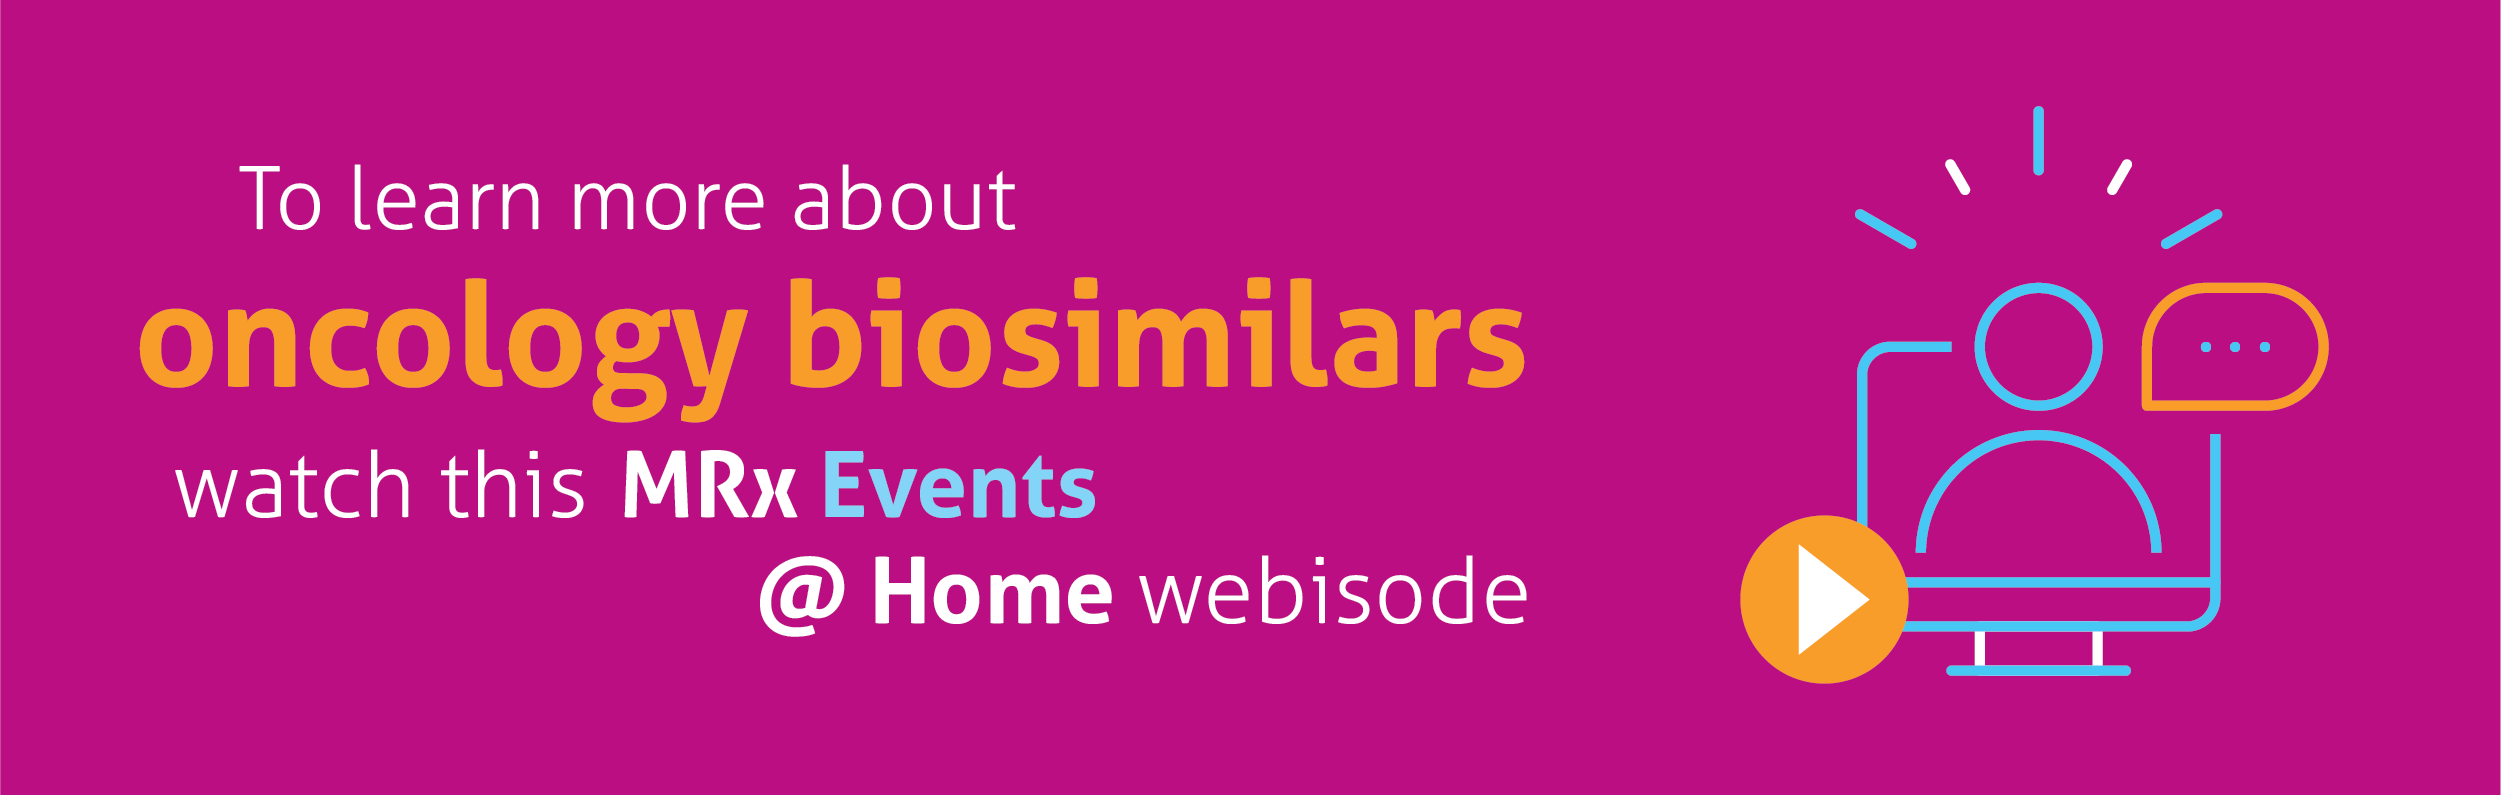 To learn more about oncology biosimilars, watch this MRx Events webisode.